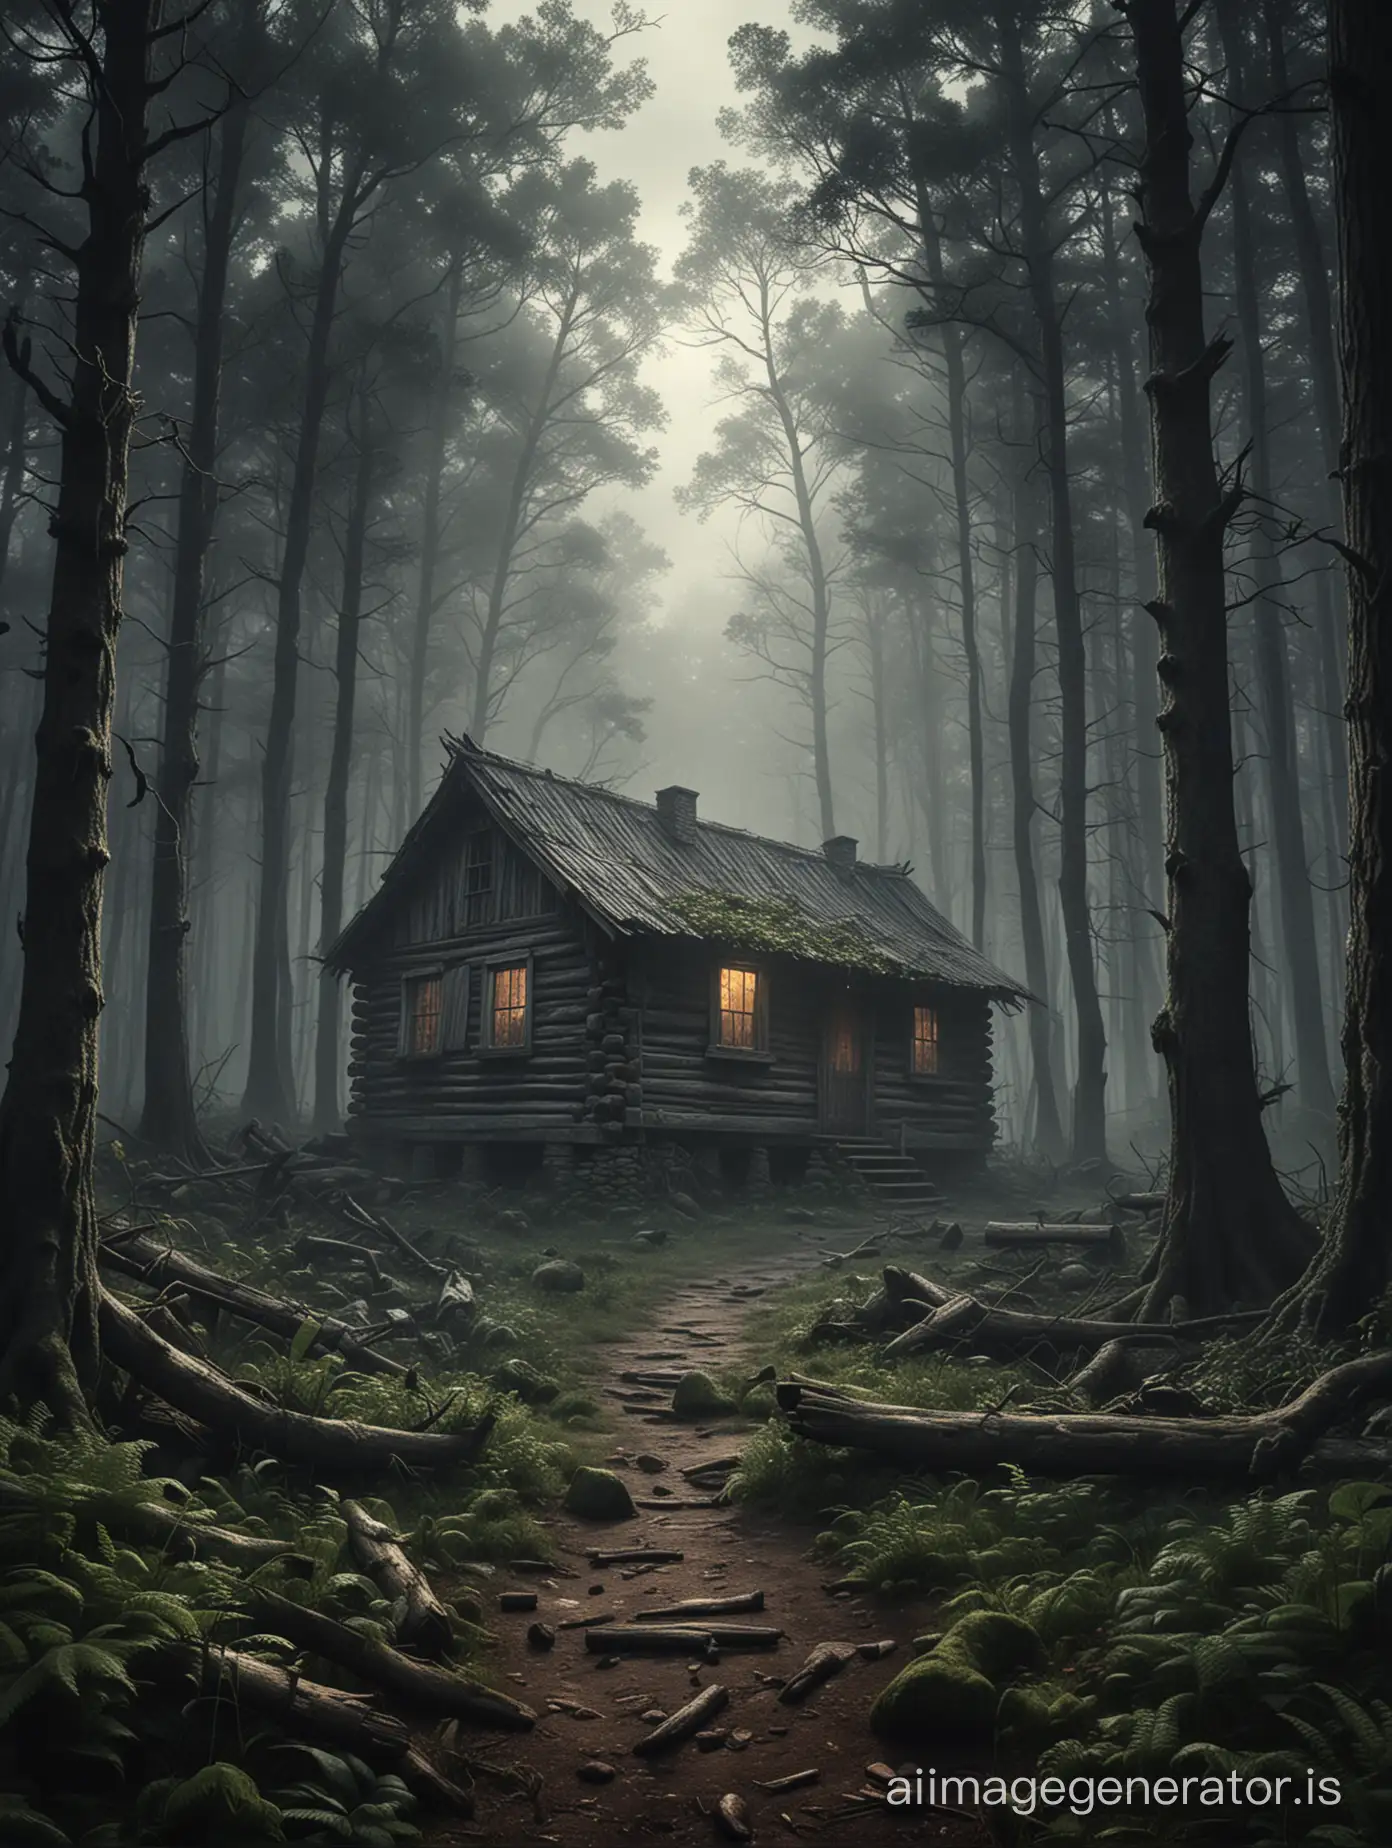 Create a dynamic and immersive poster. The scene is set in an eerie forest with an old, haunted cabin  